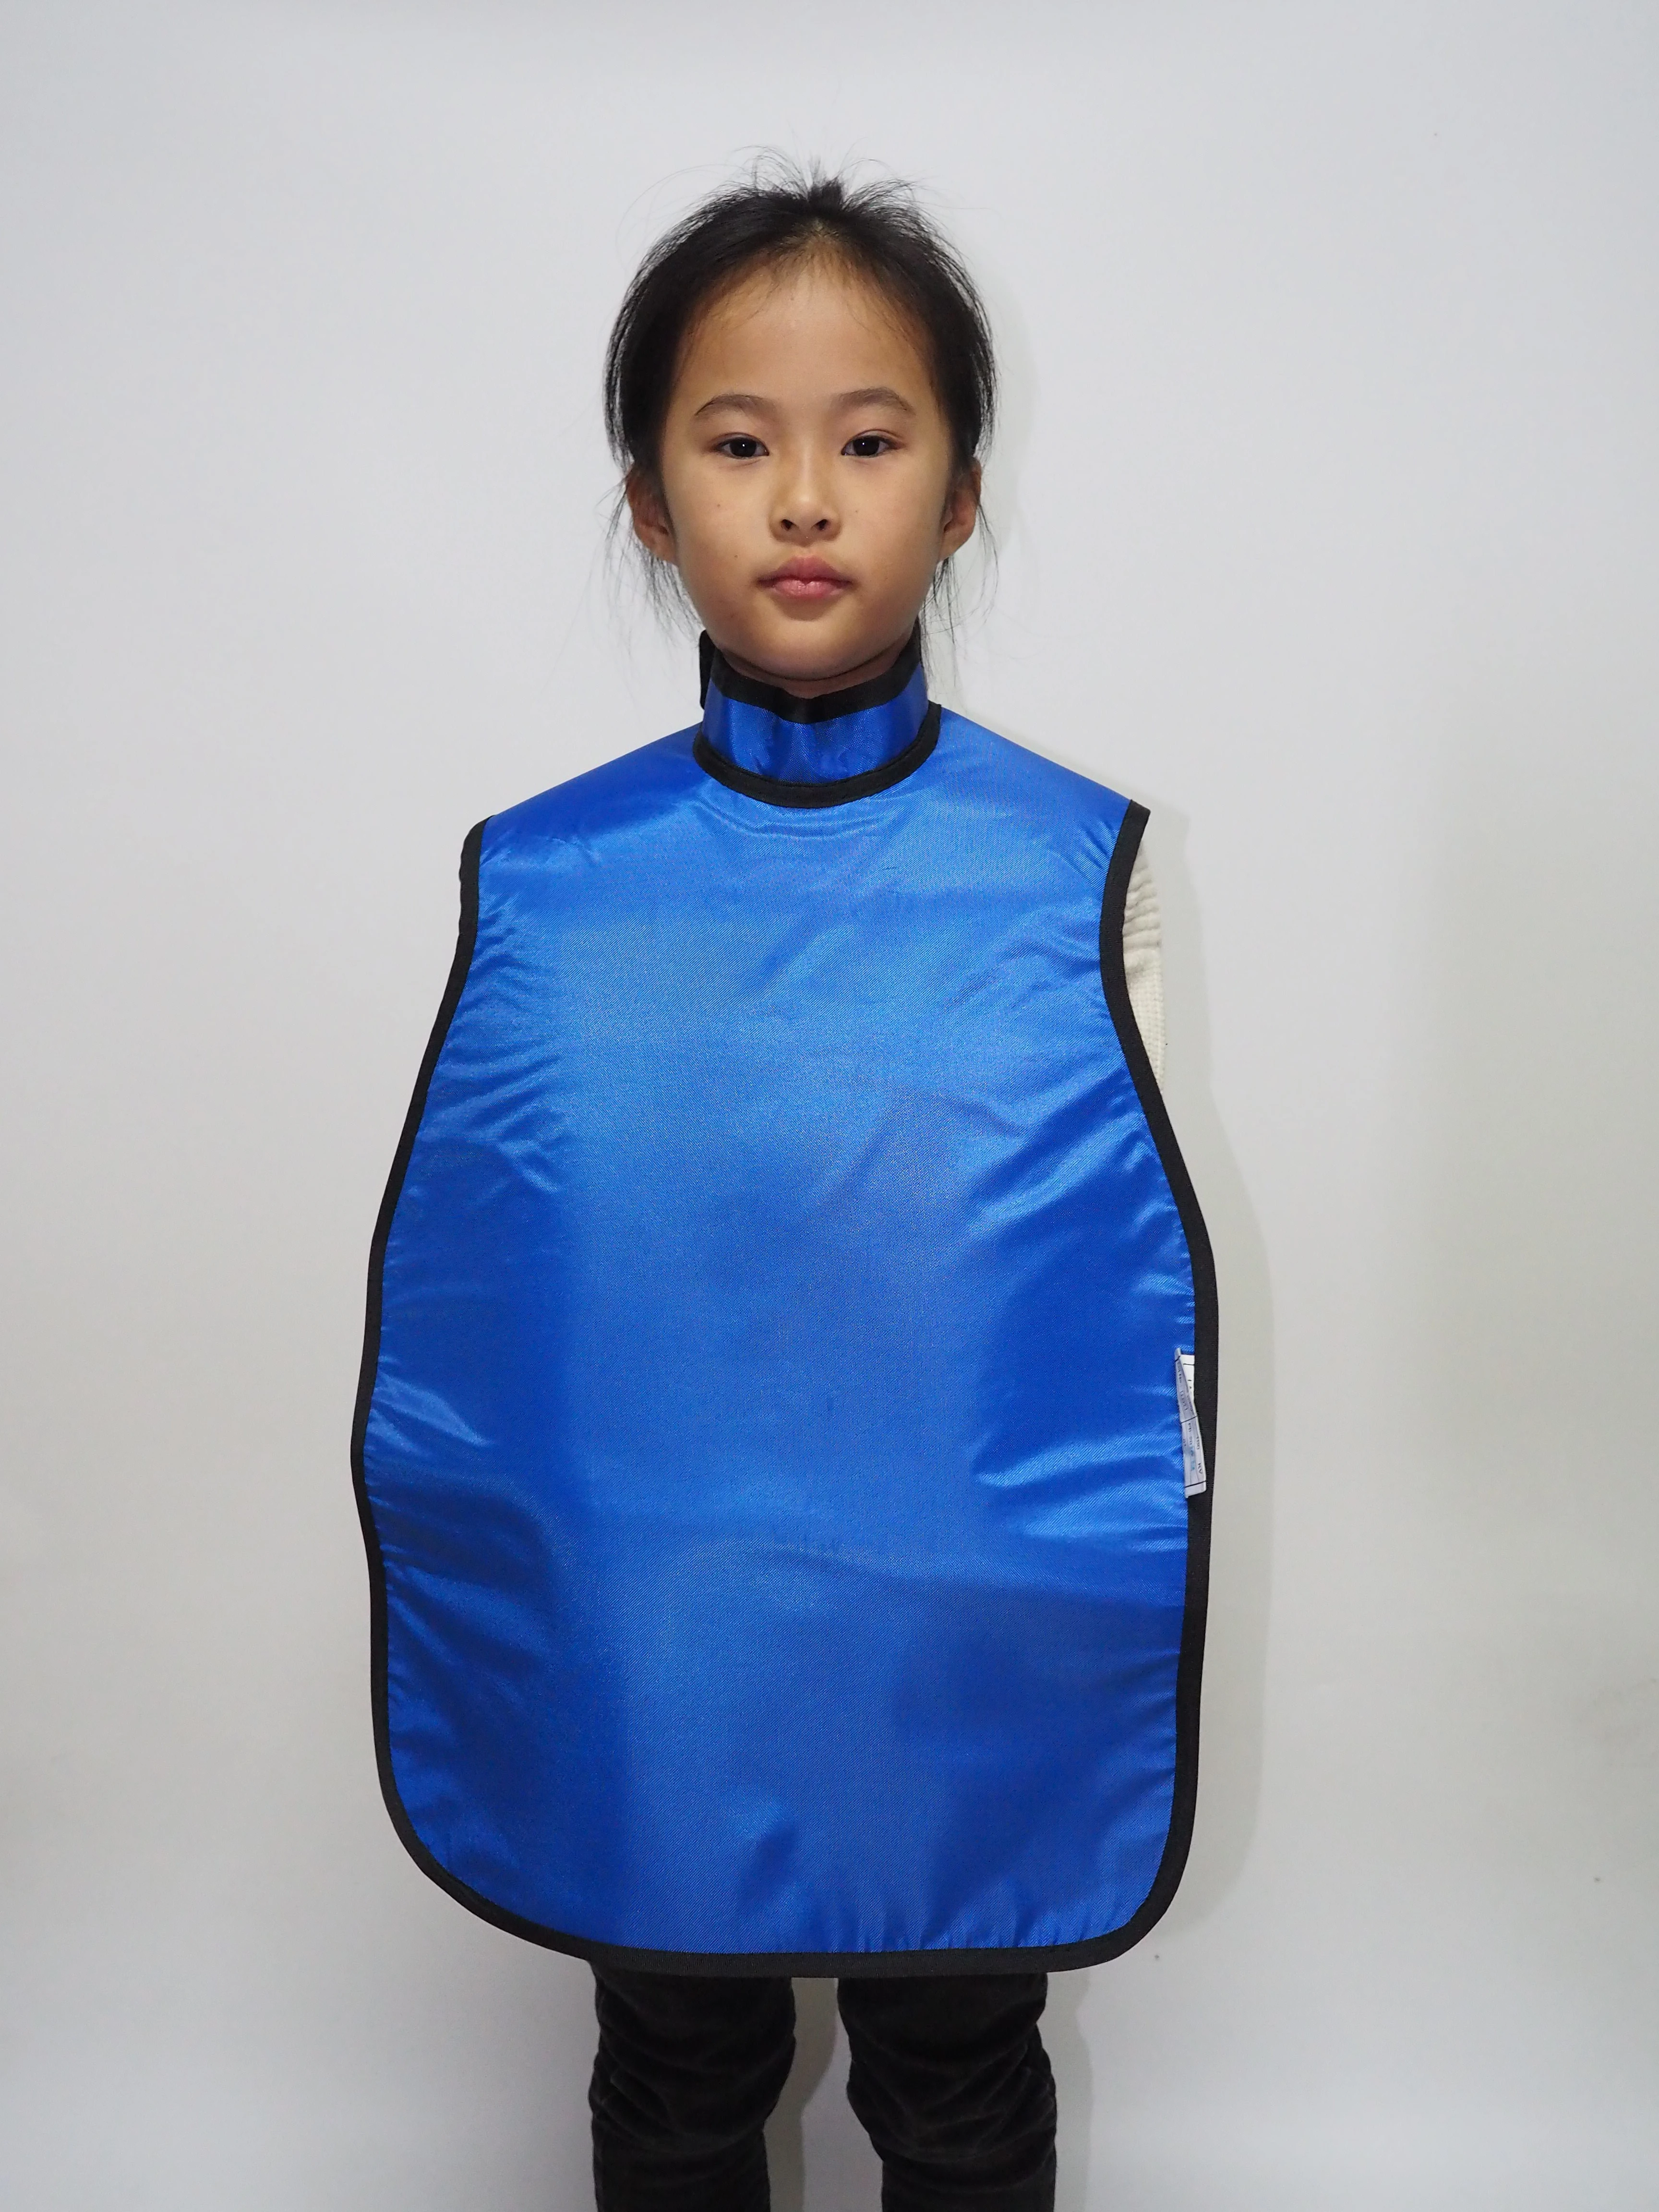 BL -113-S Dental X-Ray Lead Apron / Lead Apron for Children / Dental X-Ray Lead Apron with CE ISO approved